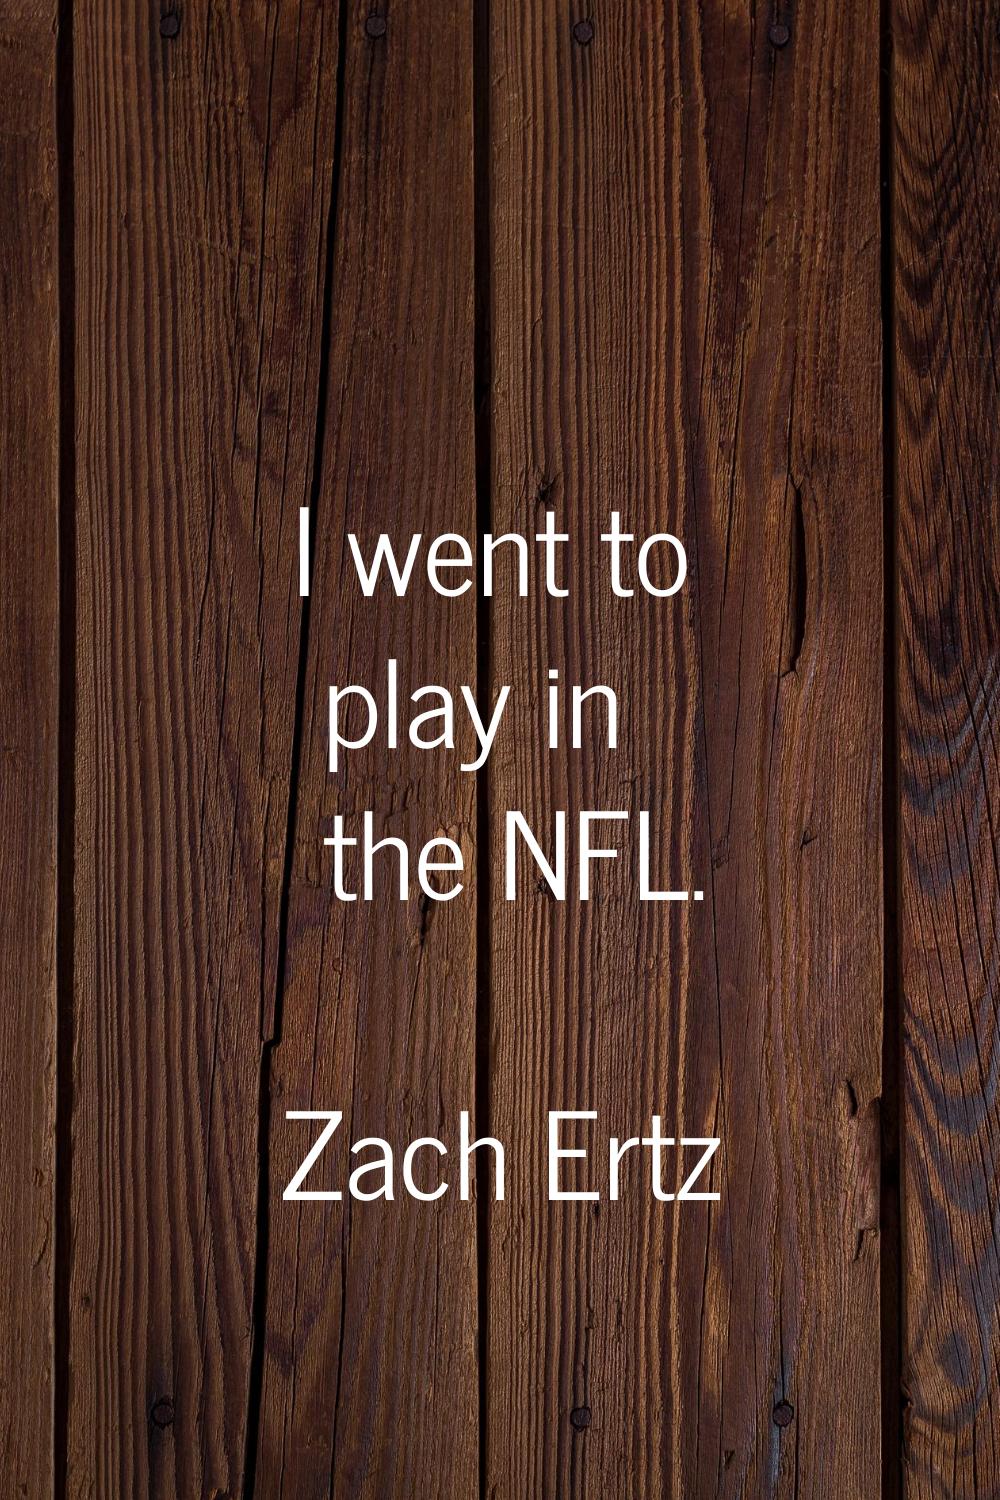 I went to play in the NFL.